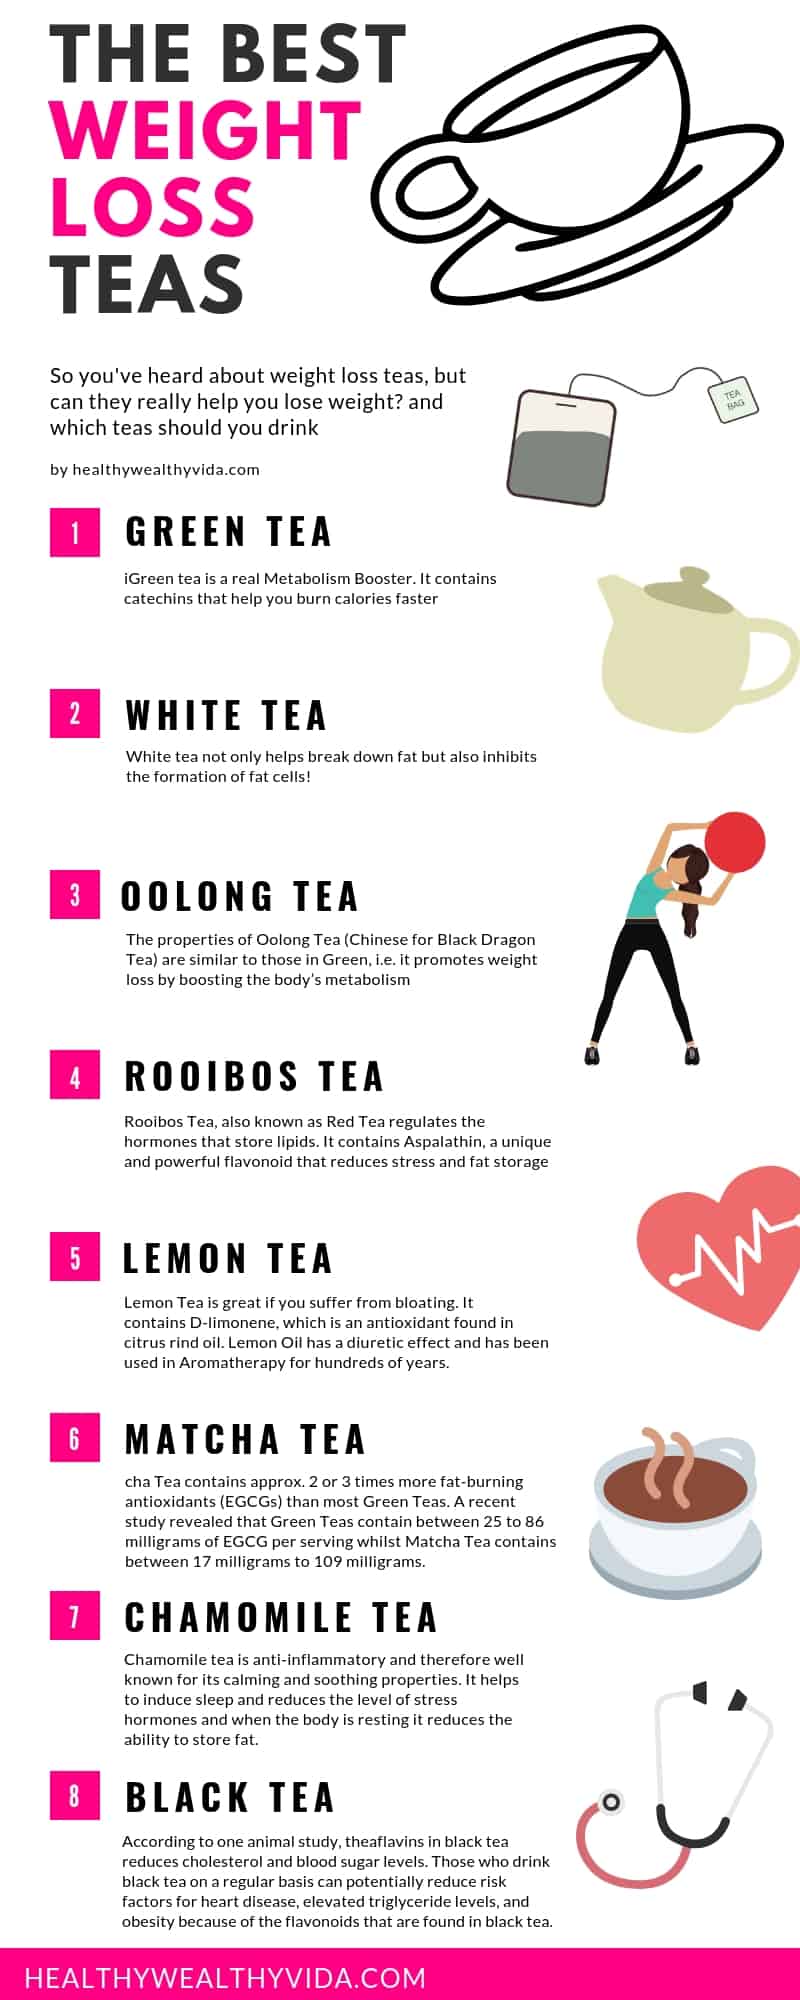 The-best-WEIGHT-LOSS-TEAS-infographic-plaza